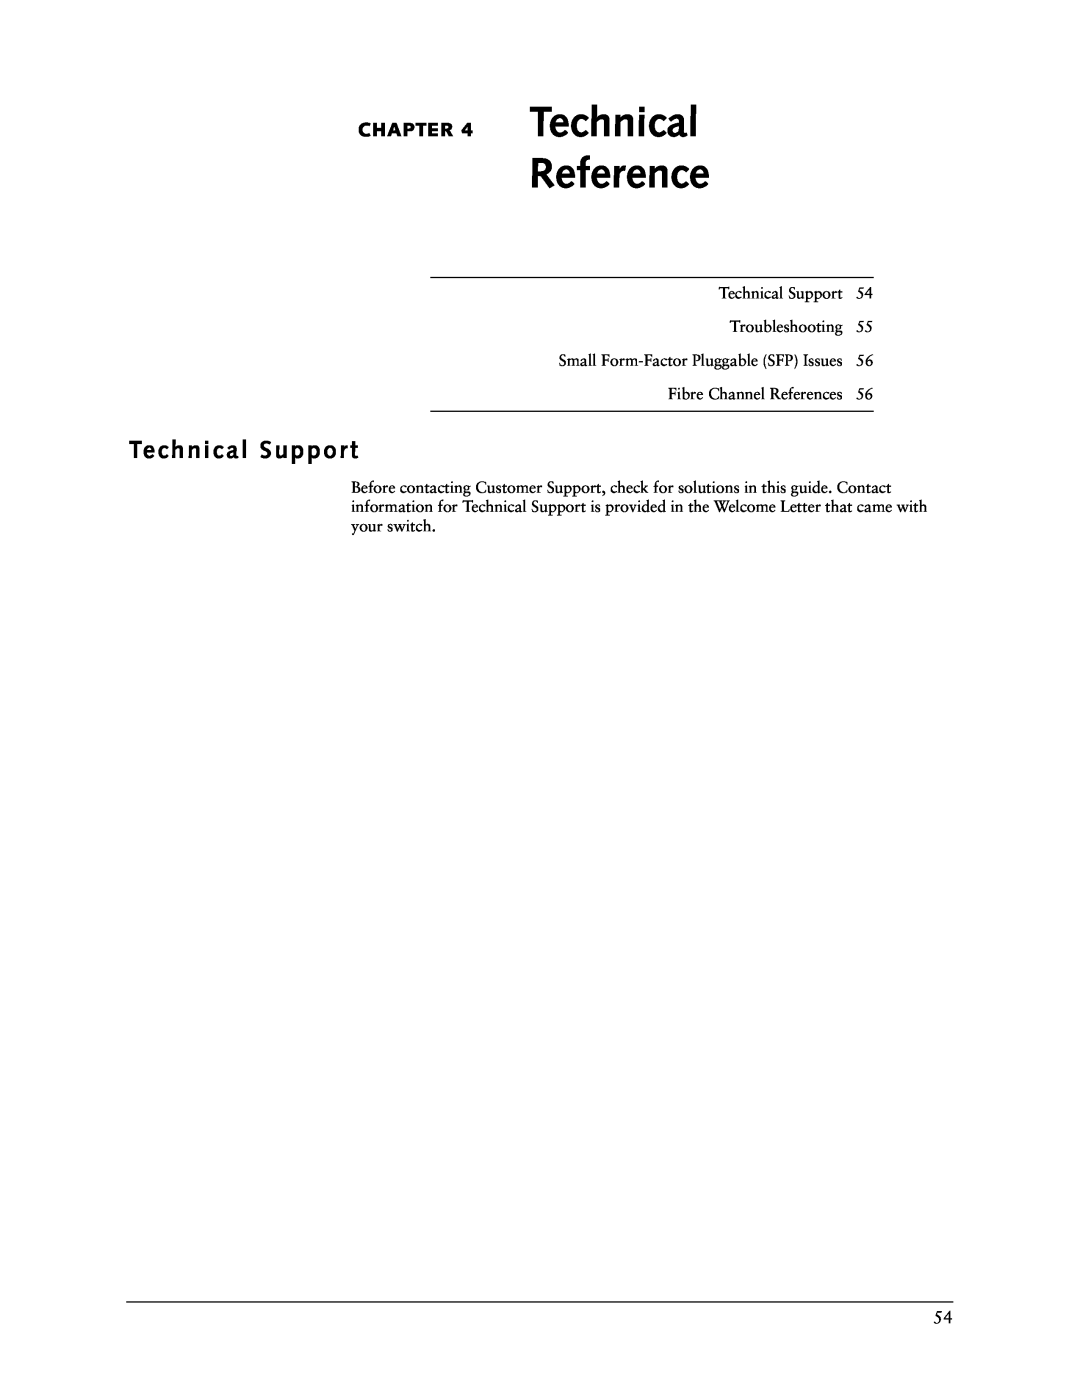 Vixel 335 manual Reference, Technical Support 